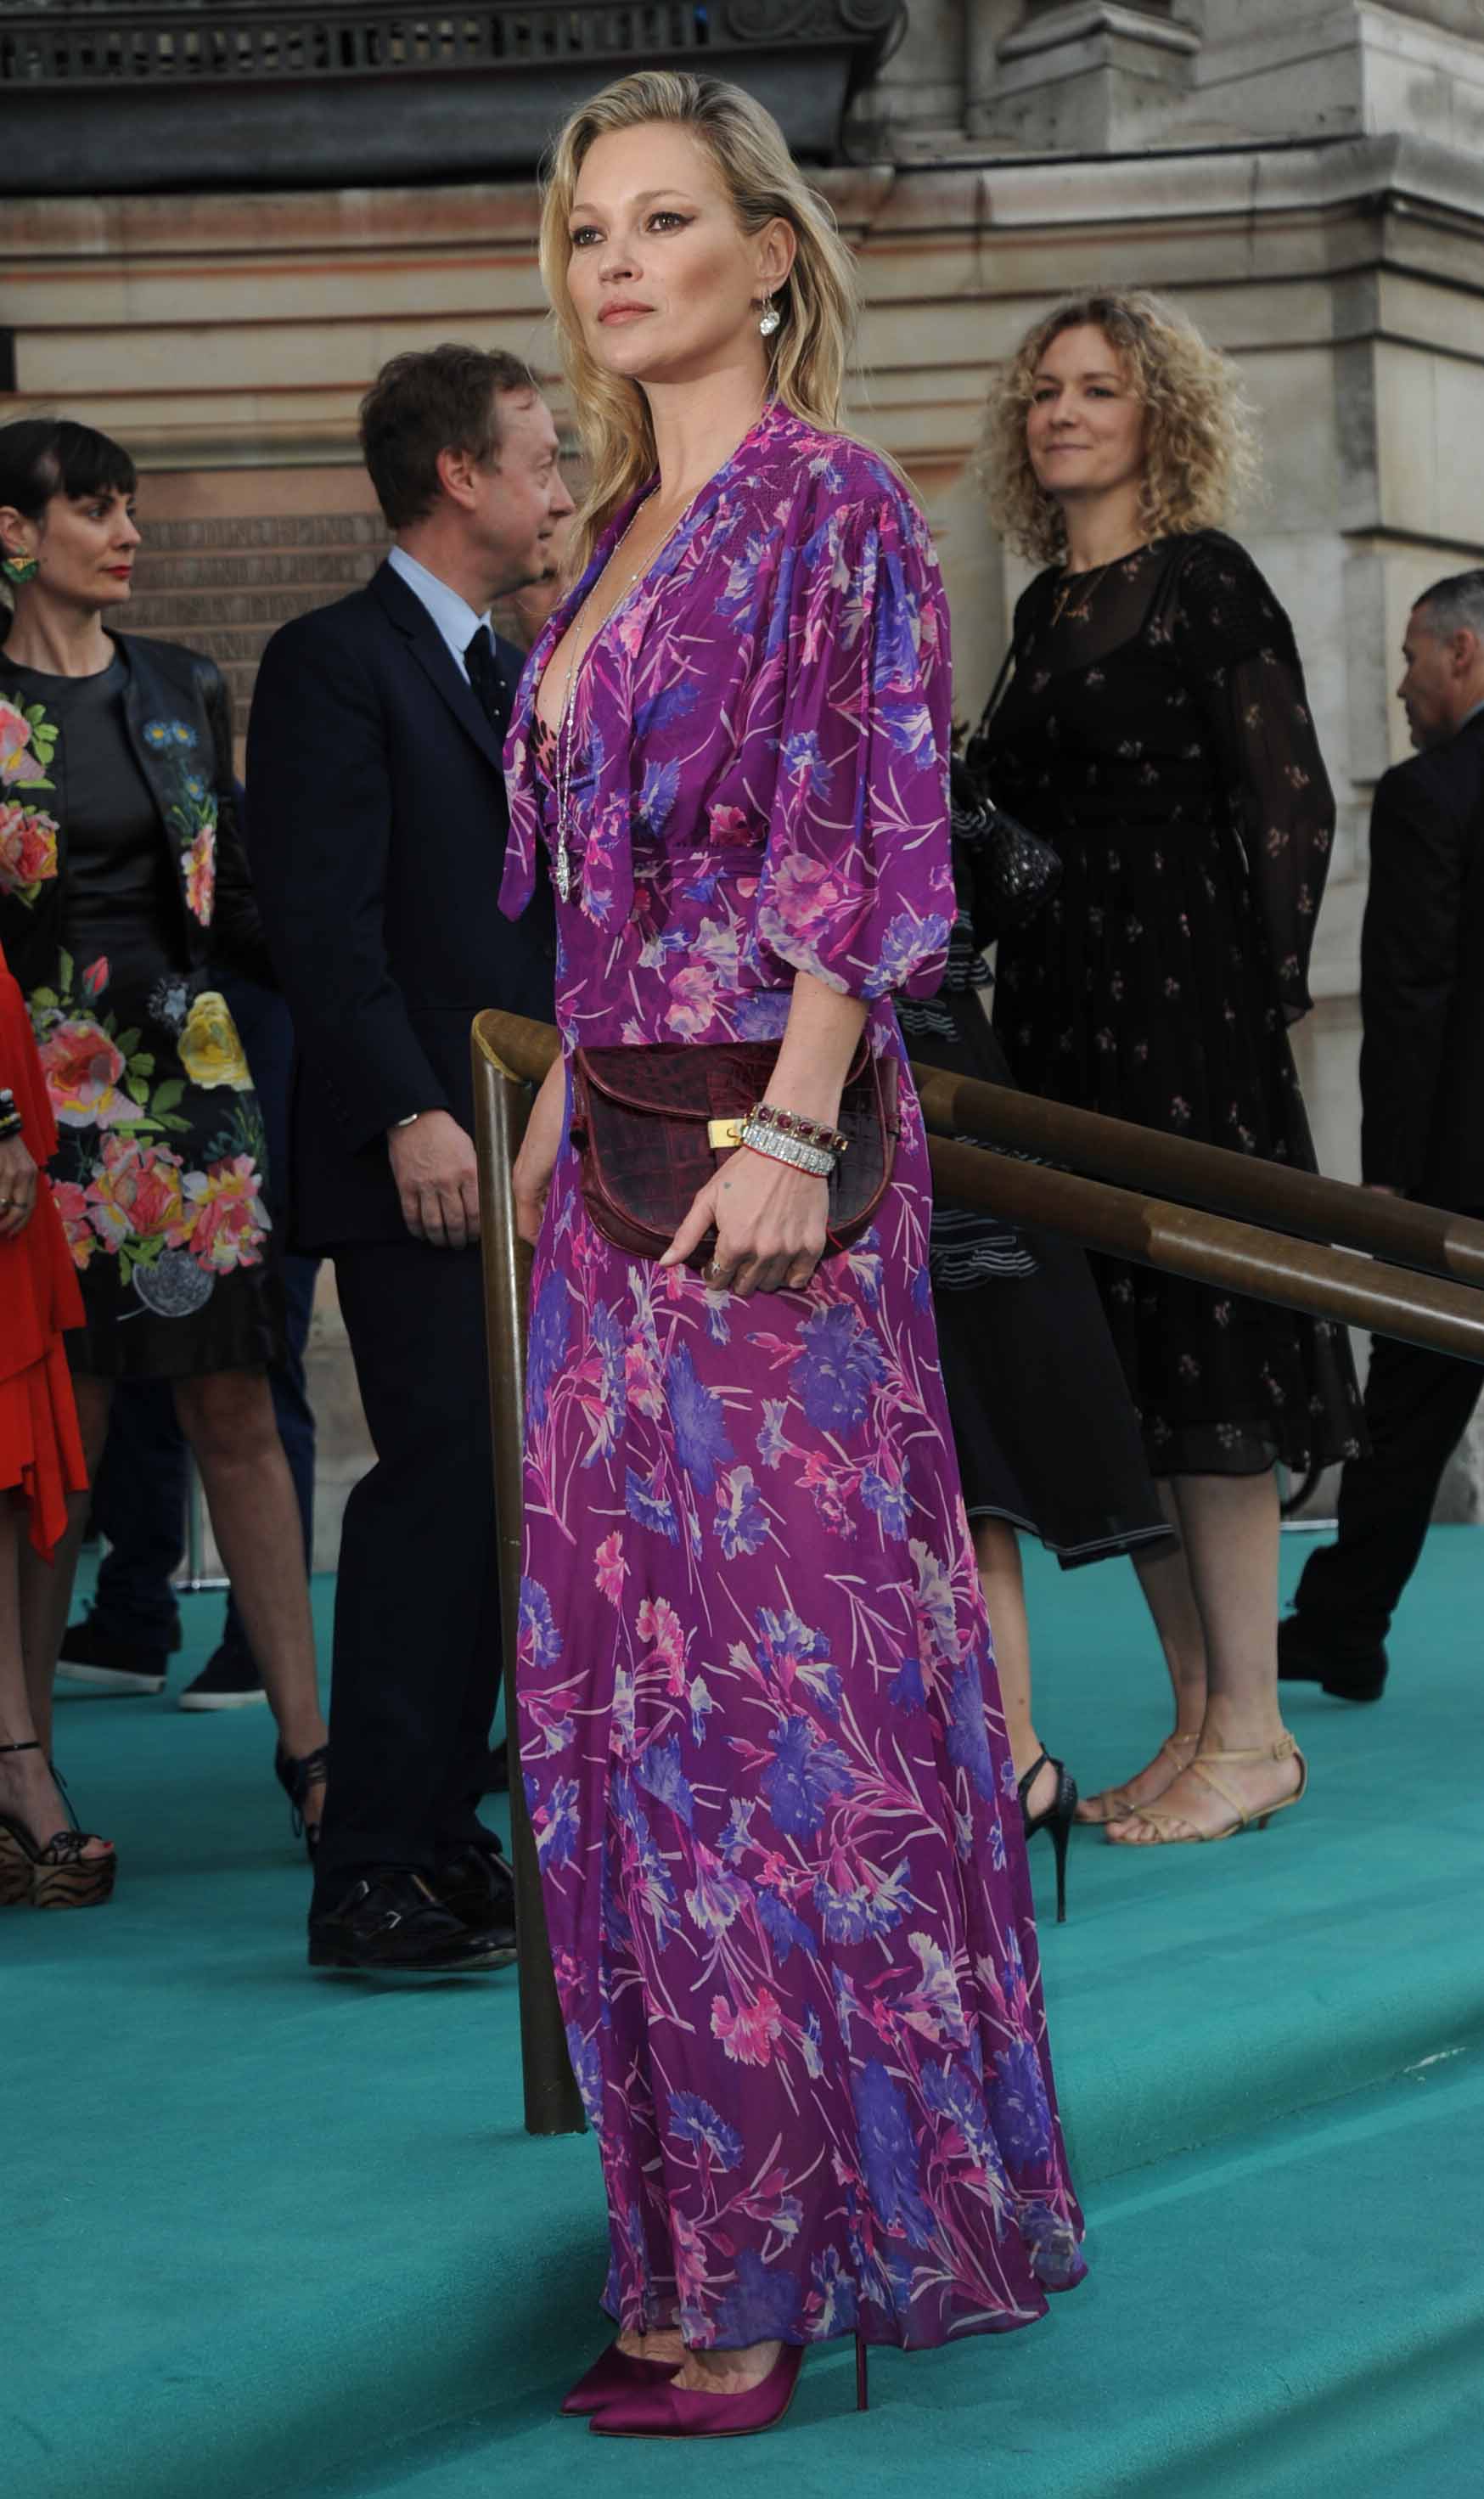 Get The Look Kate Moss Wows In Floor Length Floral Dress At The Victoria And Albert Museum 